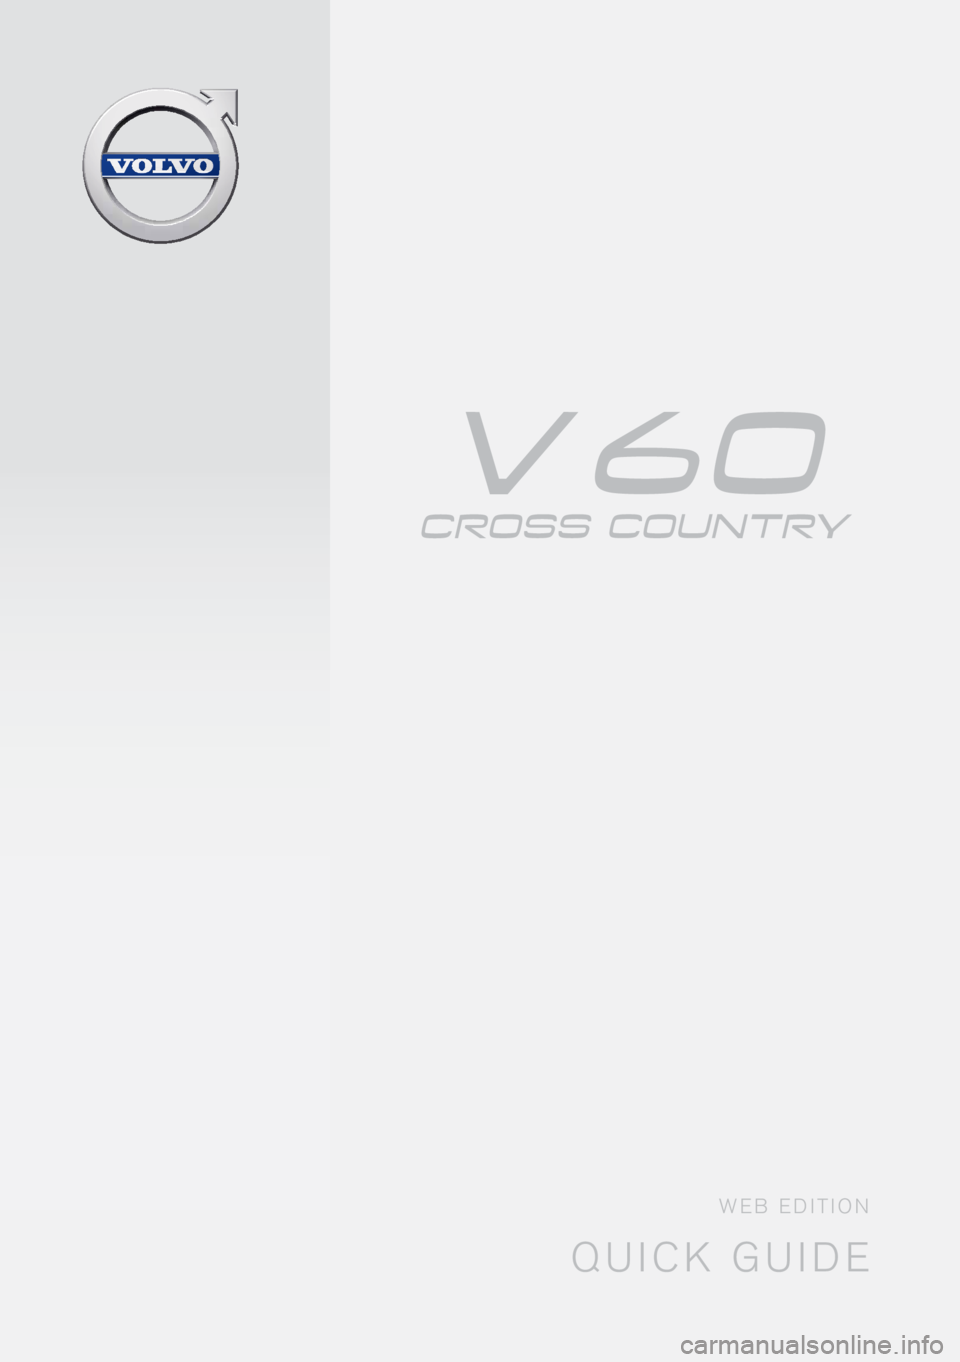 VOLVO V60 CROSS COUNTRY 2016  Quick Guide QUICK GUIDE
WEB EDITION 